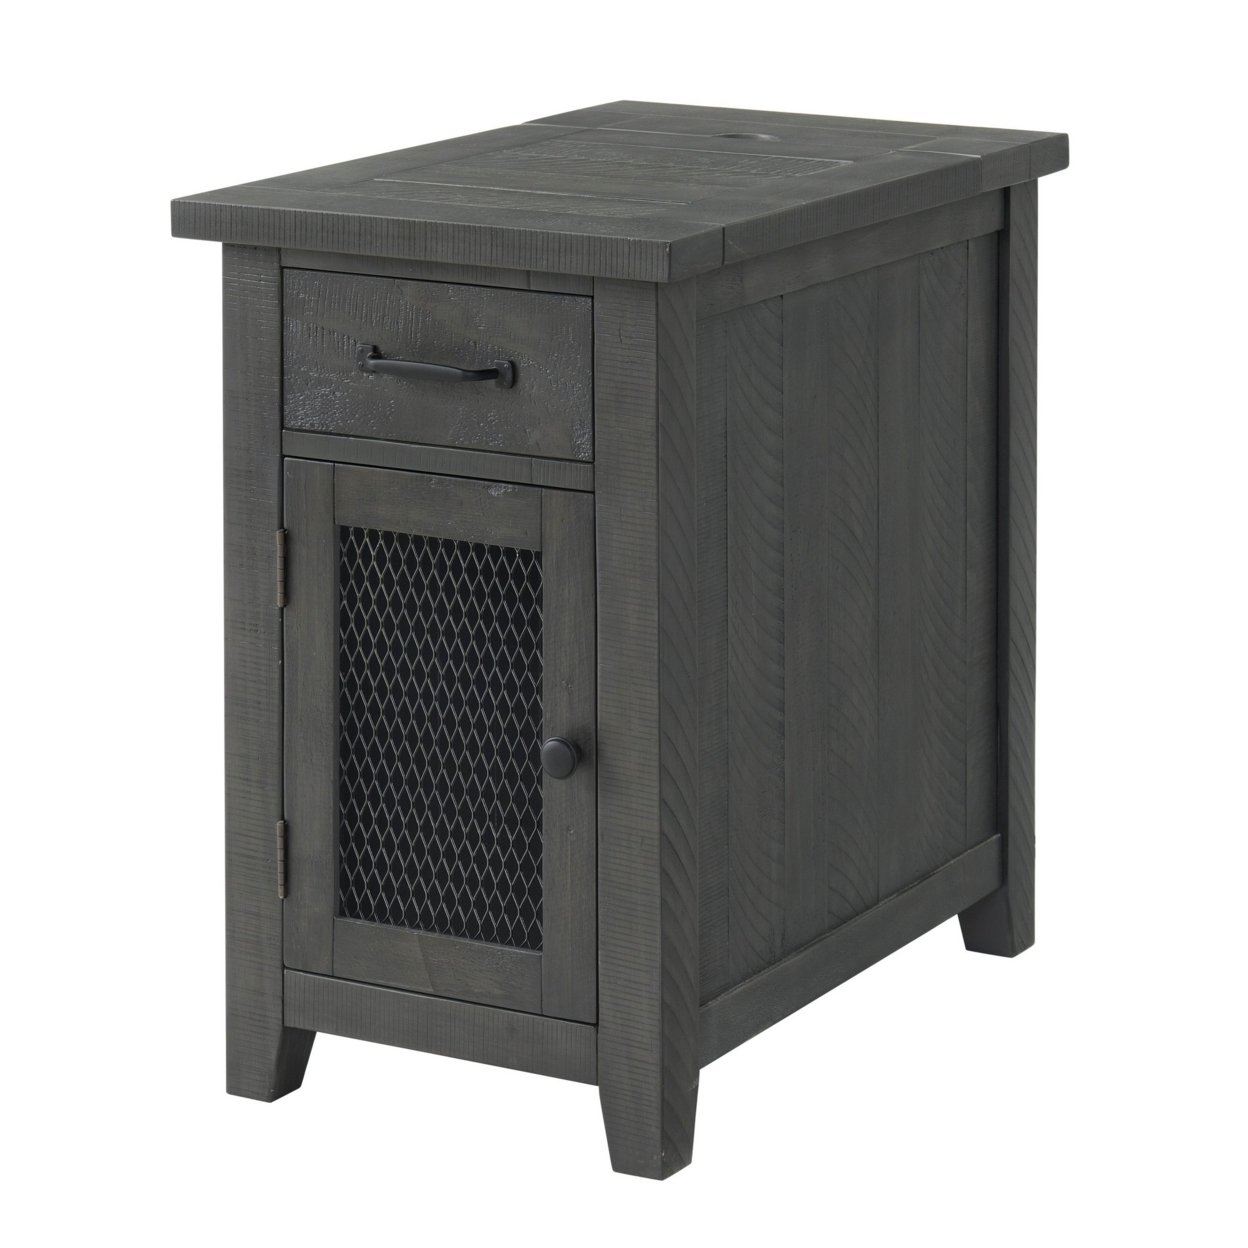 Chairside Table With 1 Drawer And 1 Wire Door, Gray- Saltoro Sherpi